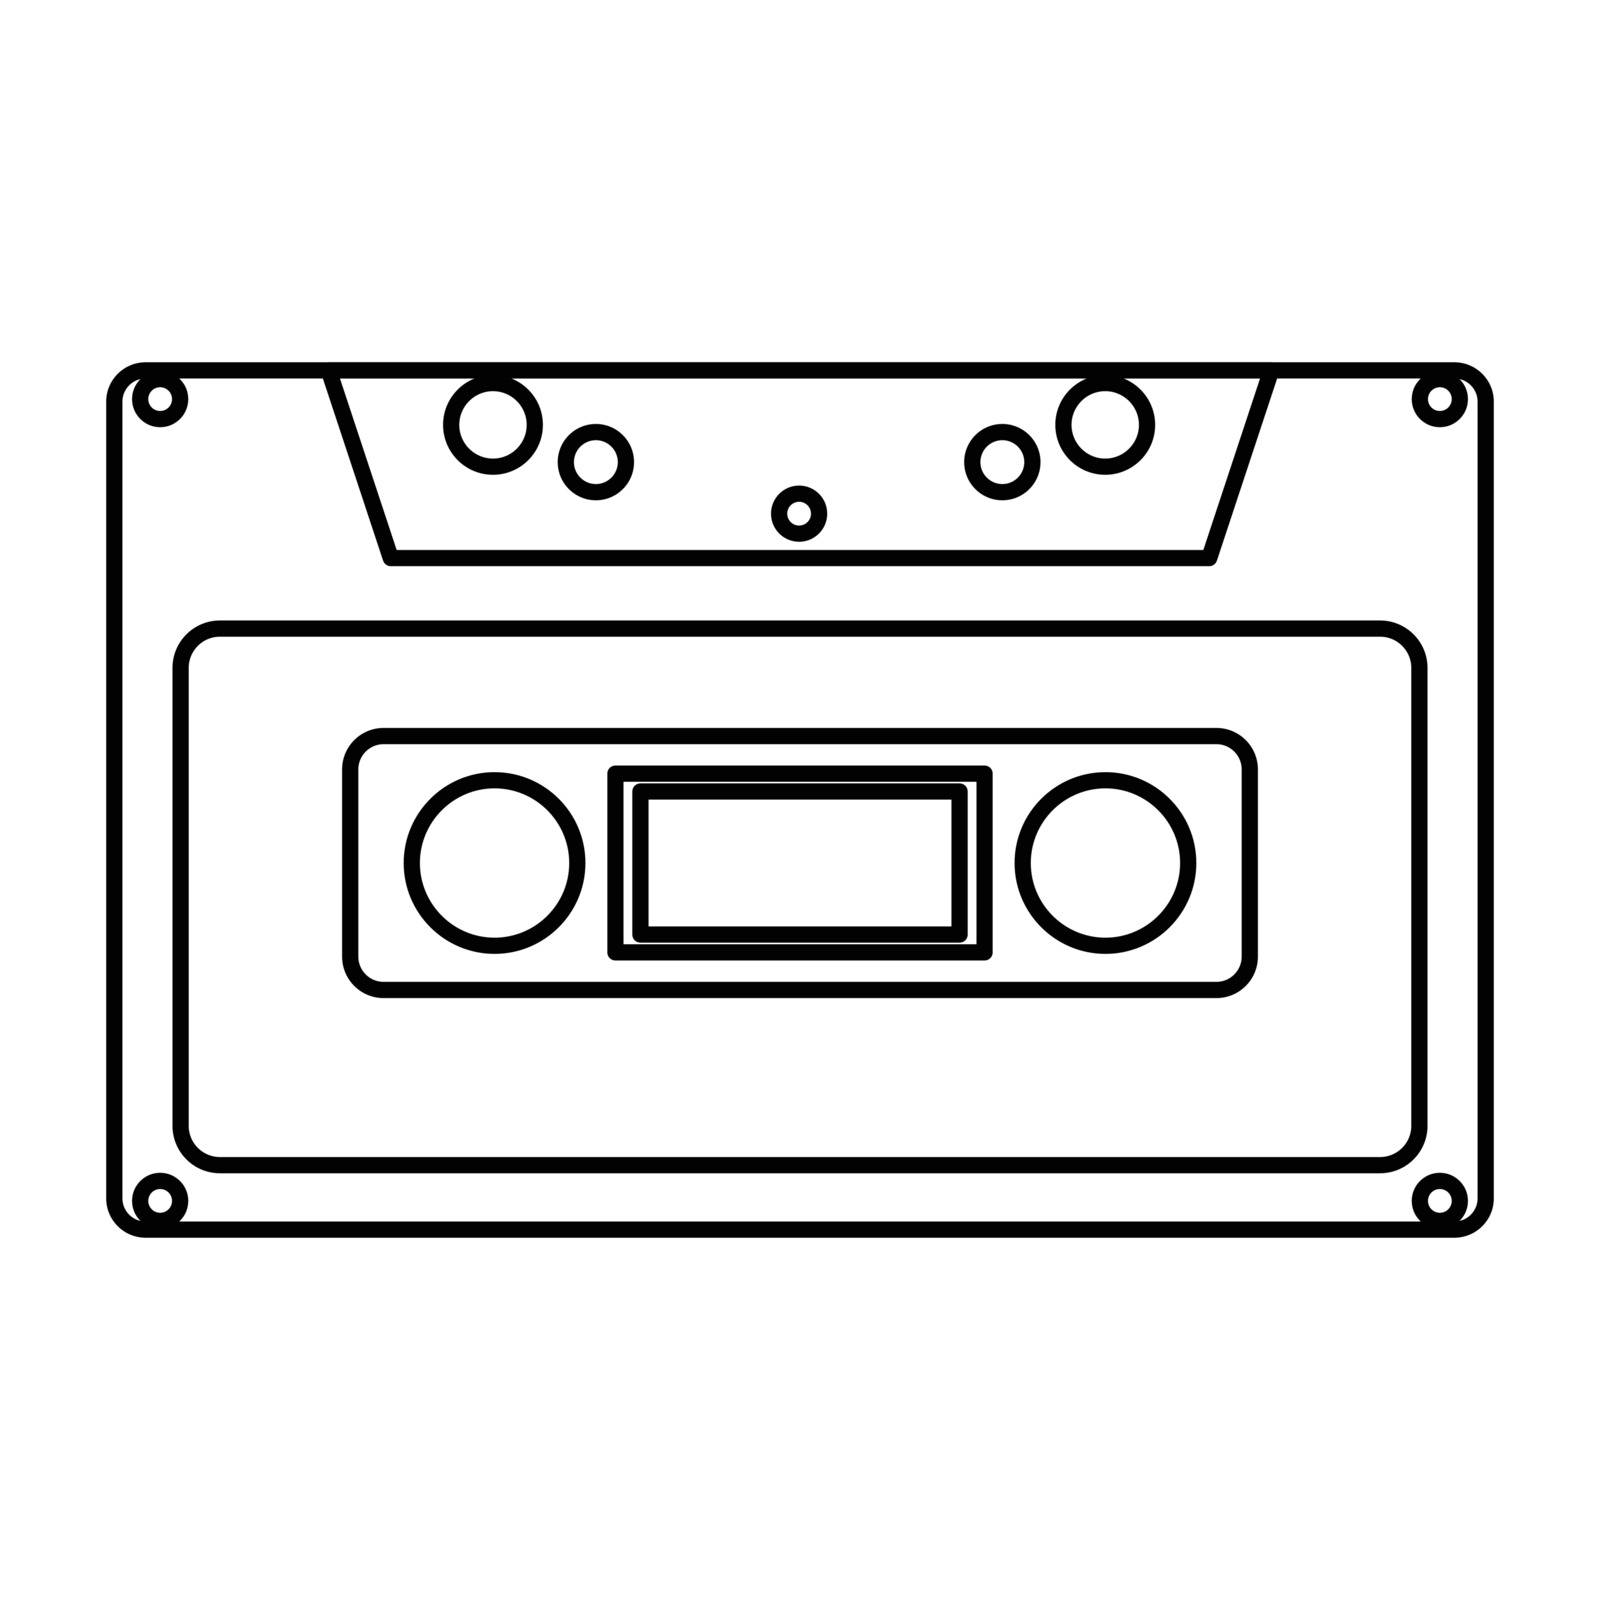 Thin line cassette icon by ang_bay